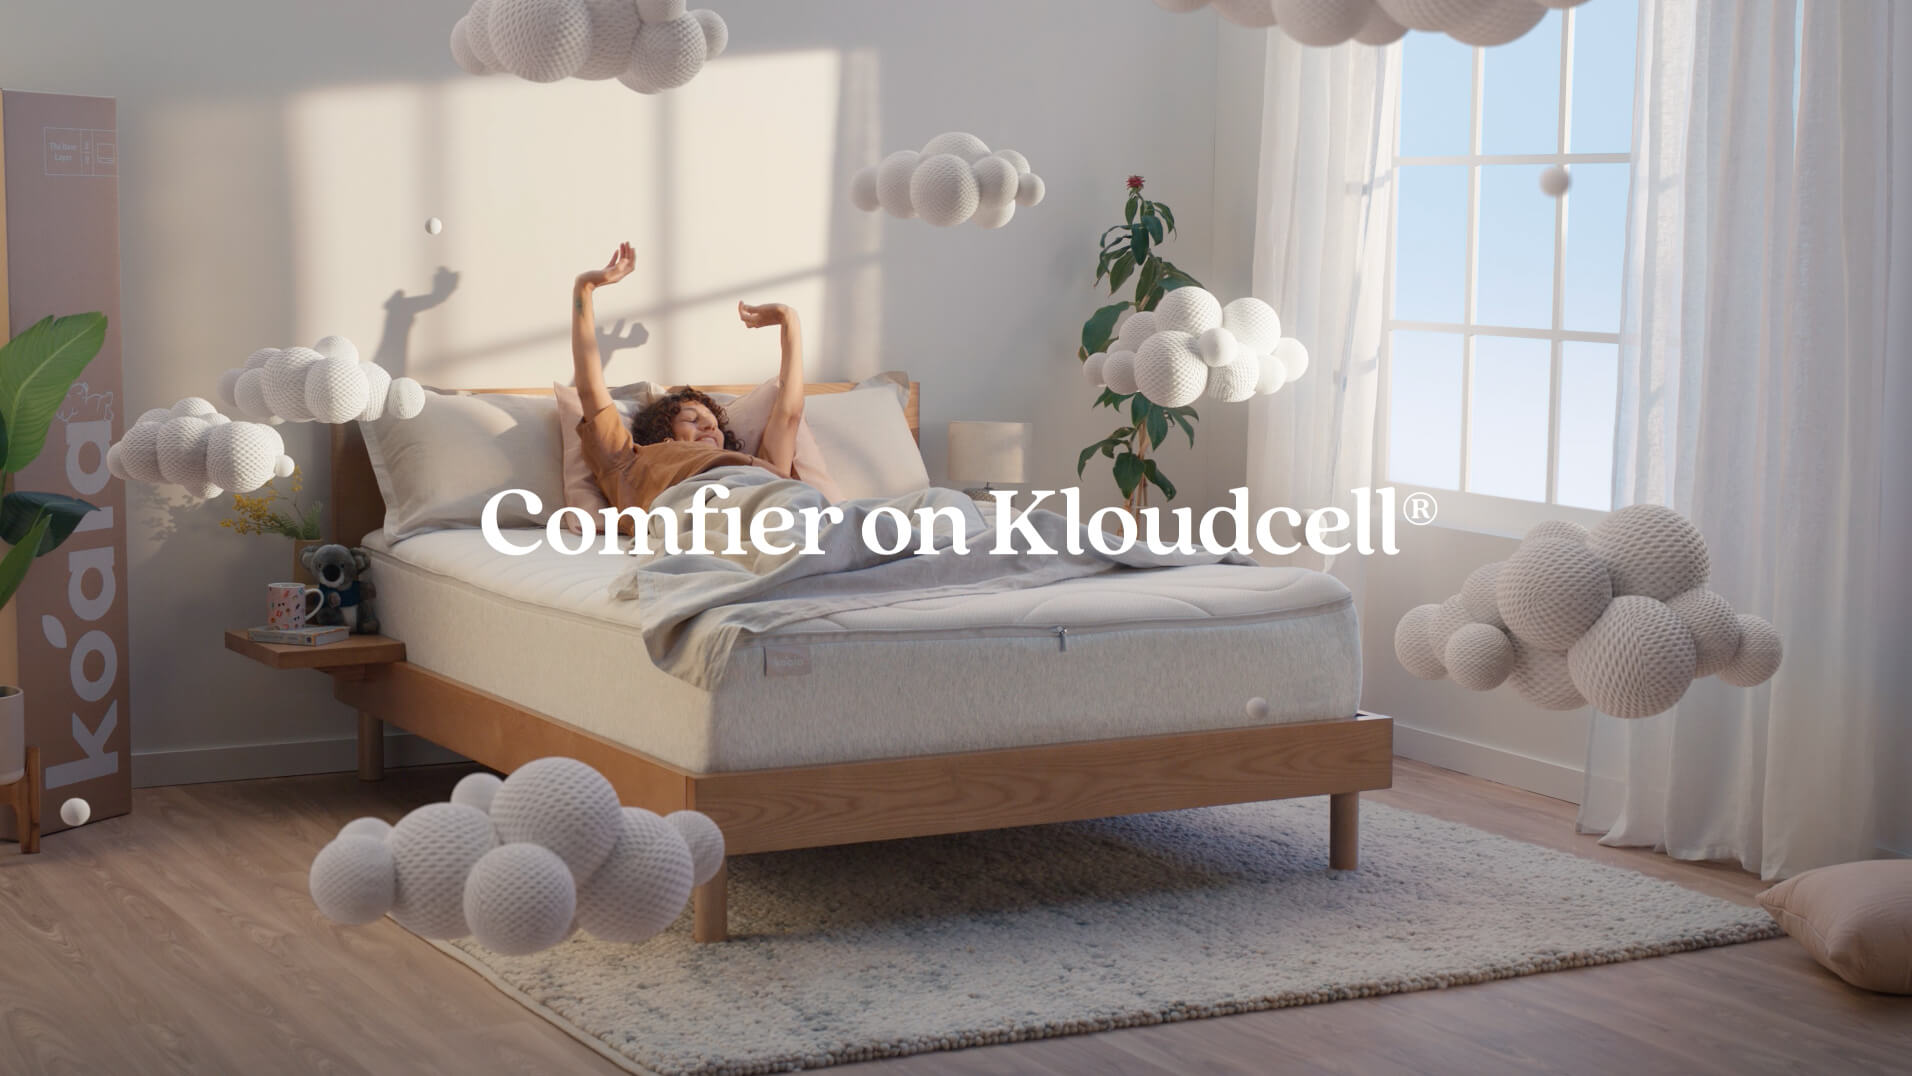 Koala Kloudcel television campaign commercial showing woman laying on bed sleeping peacefully as VFX foam clouds surround her with text saying comfier on Kloudcell